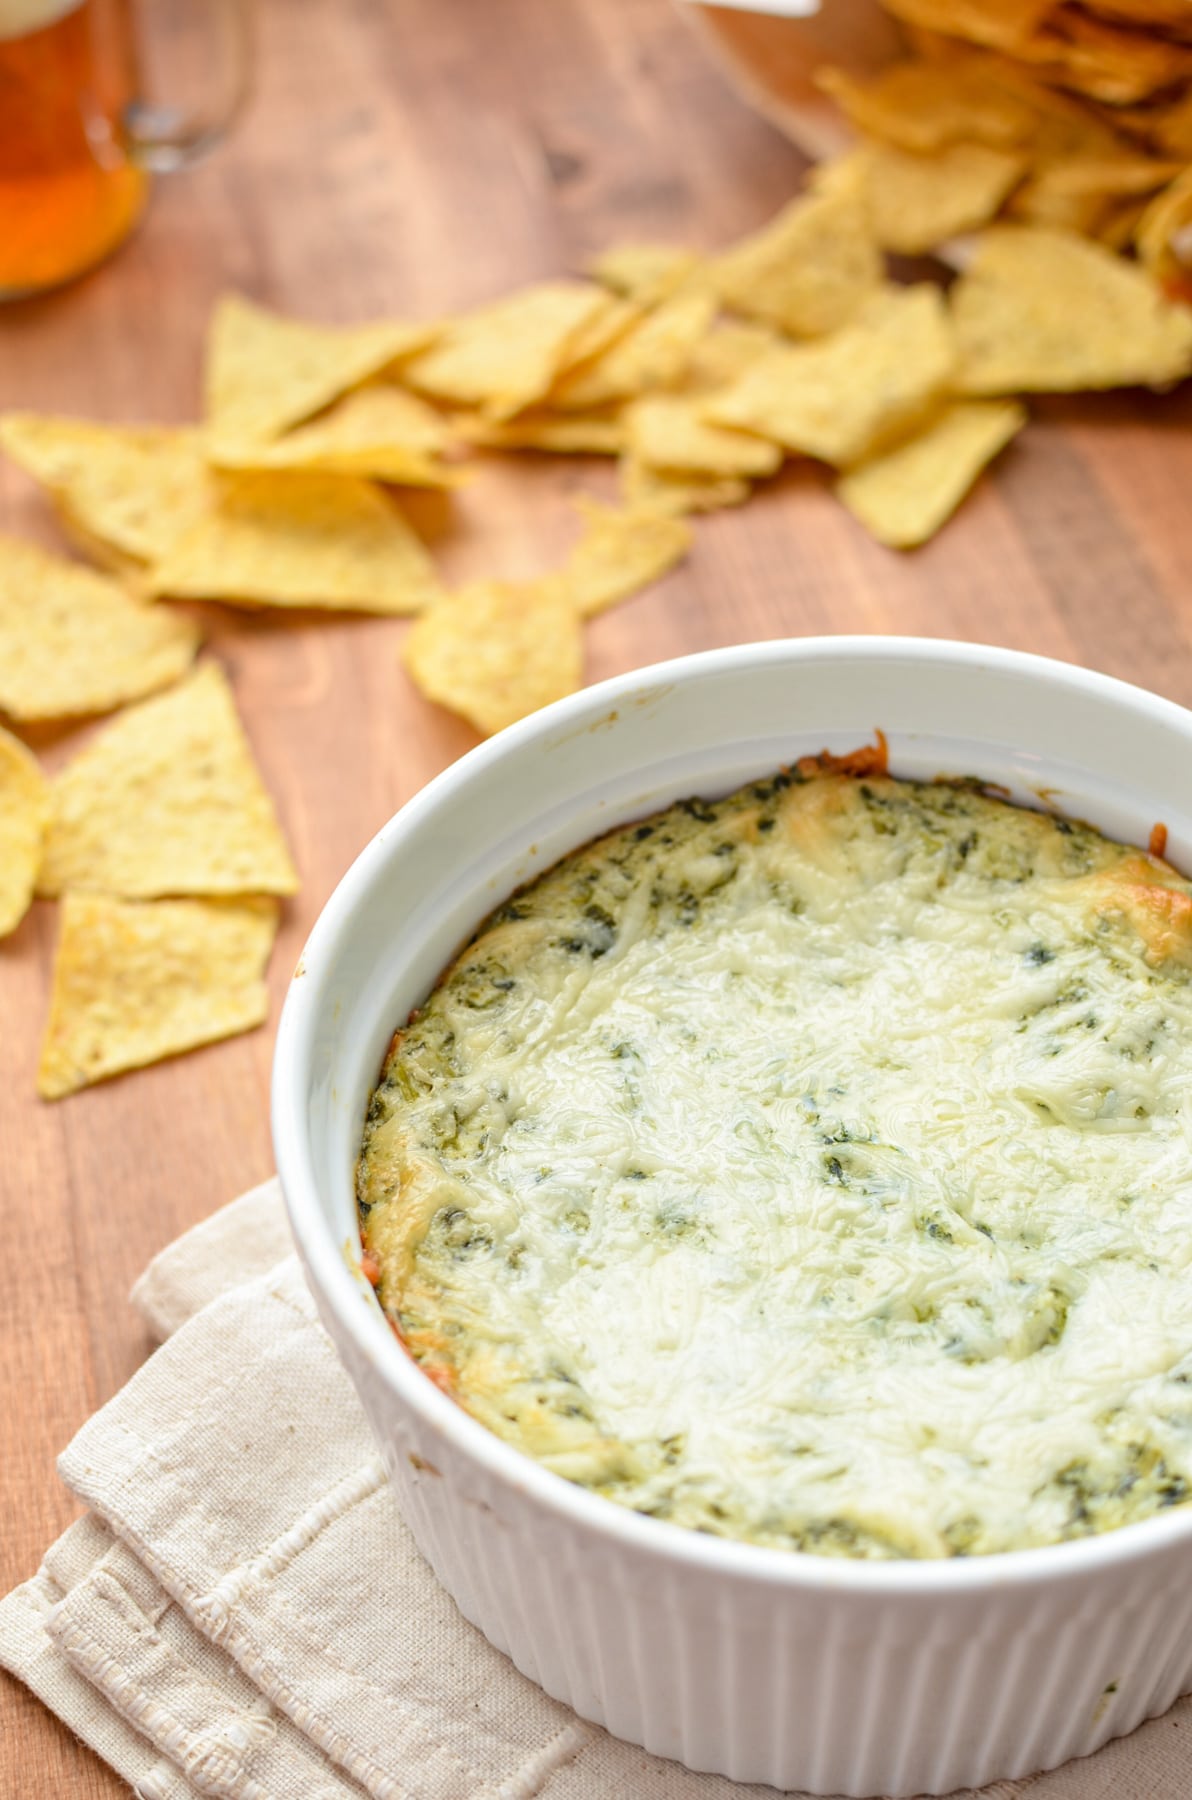 A 2 quart round dish filled with a baked spinach artichoke dip and surrounded by tortilla chips.